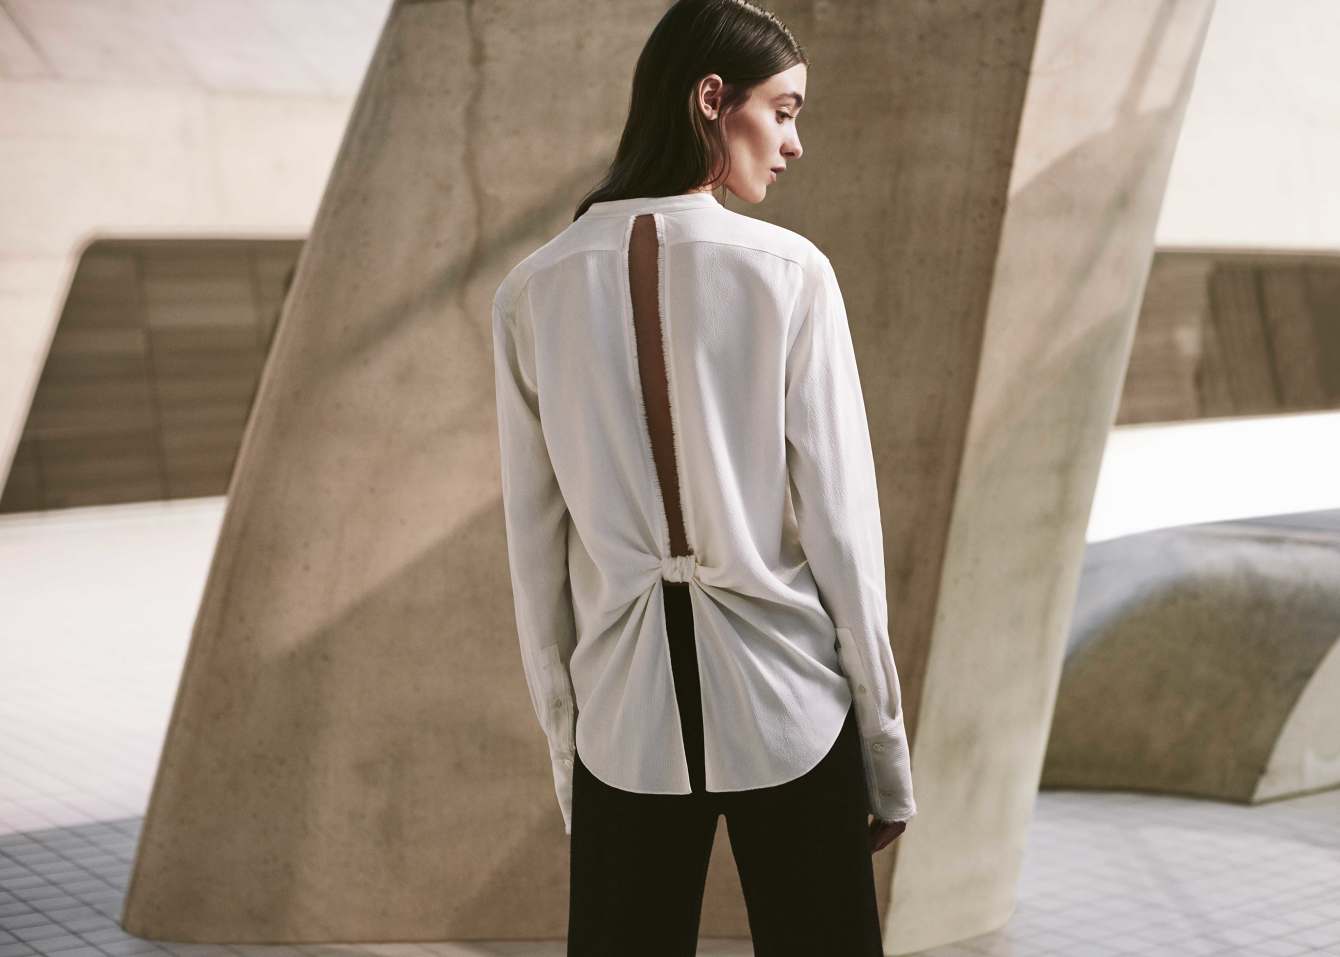 Redefining Fashion: Decoding Helmut Lang's Universal Appeal